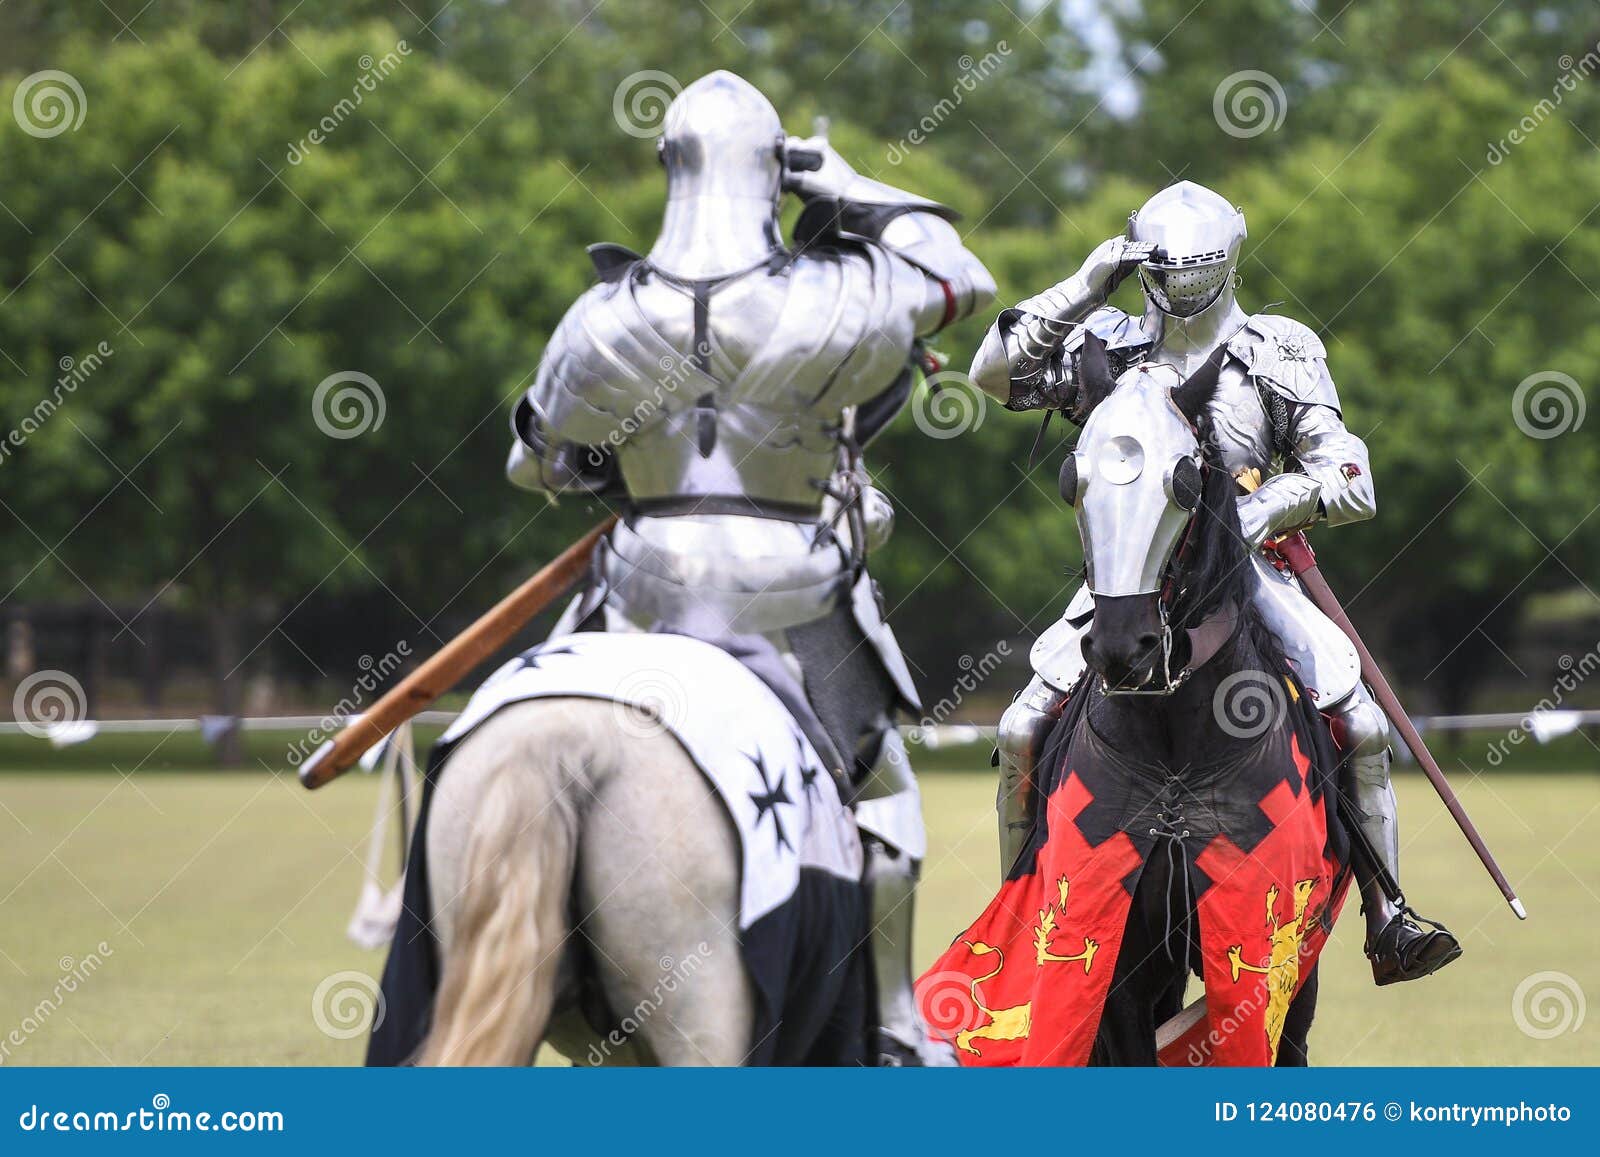 two knights salute during medieval jousting tournament